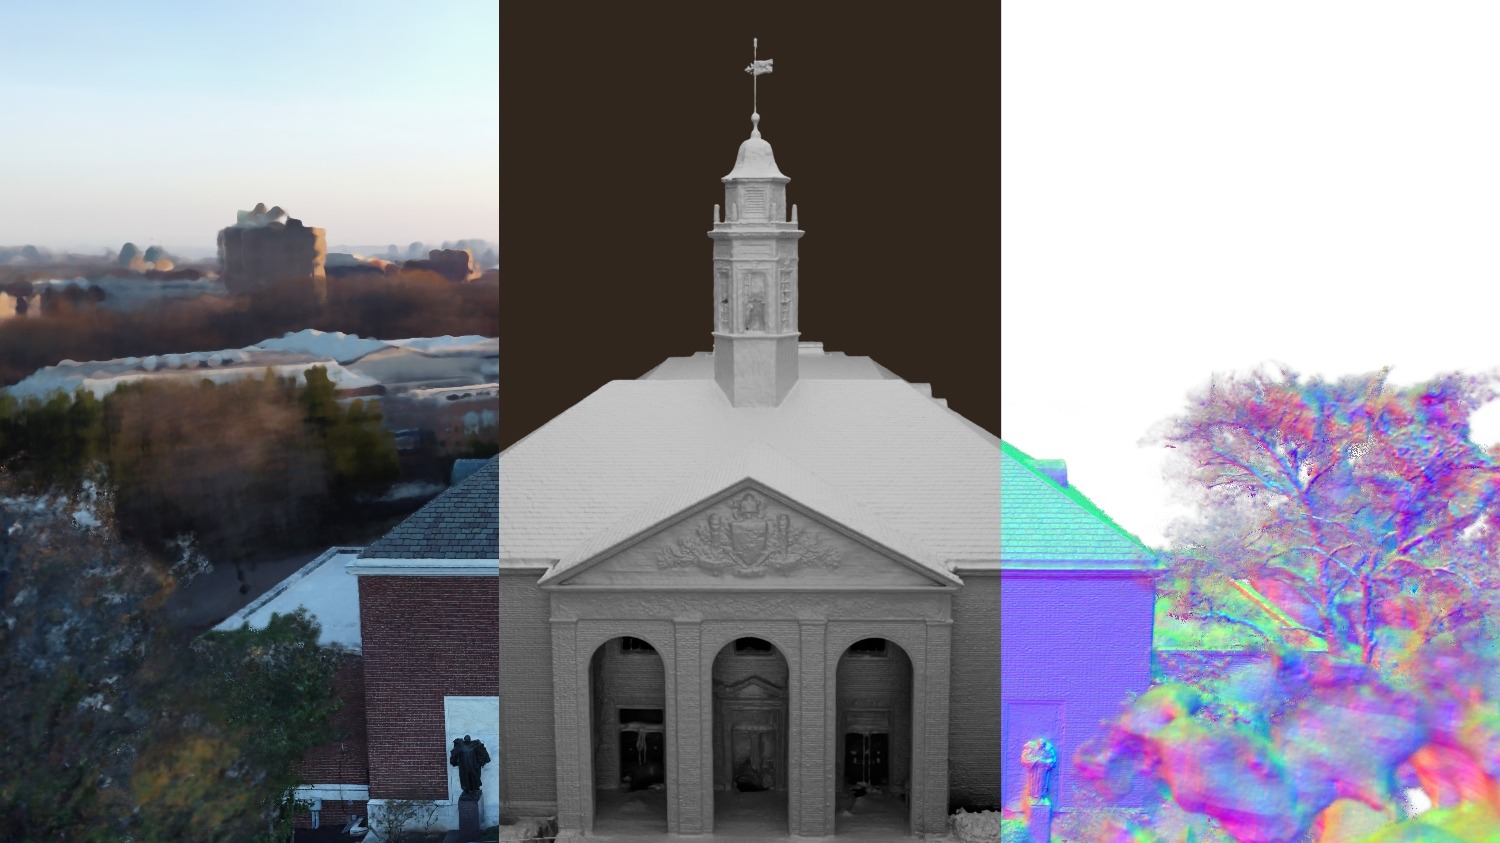 Three views of Shriver Hall: original, Neuralangelo rendering in gray, and RGB normal.